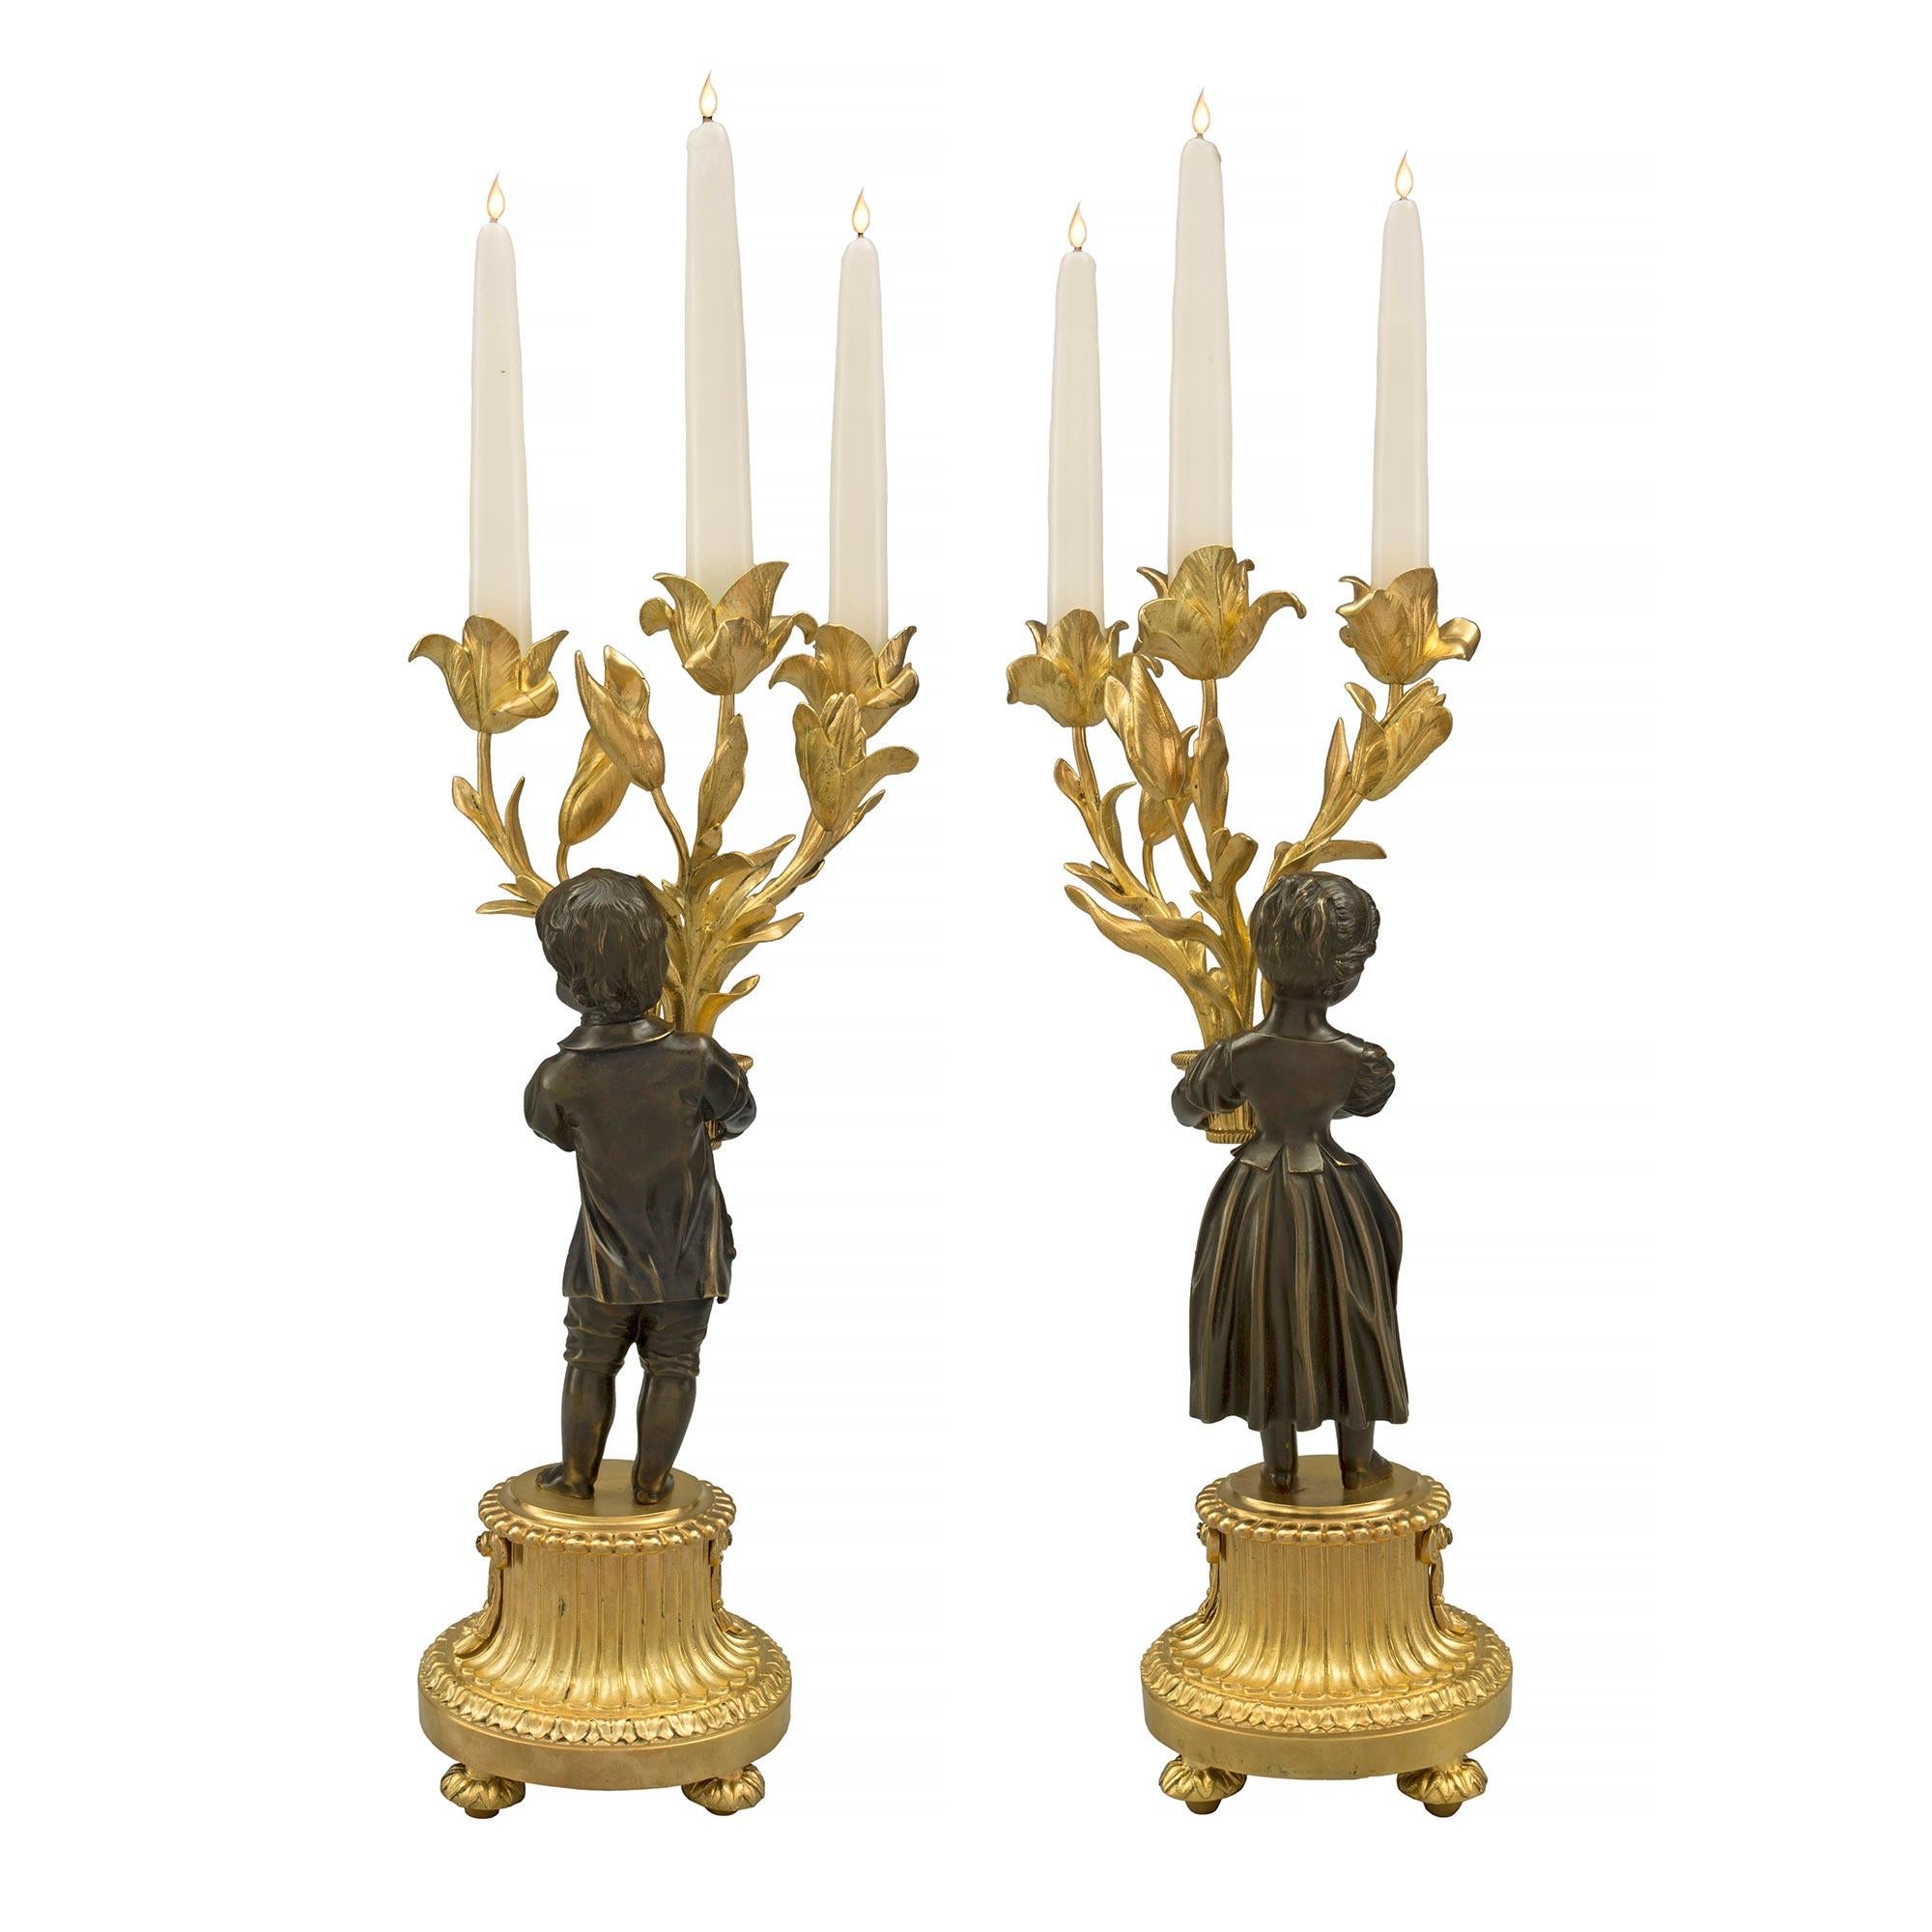 Patinated Pair of French 19th Century Louis XVI Style Three-Arm Candelabras For Sale